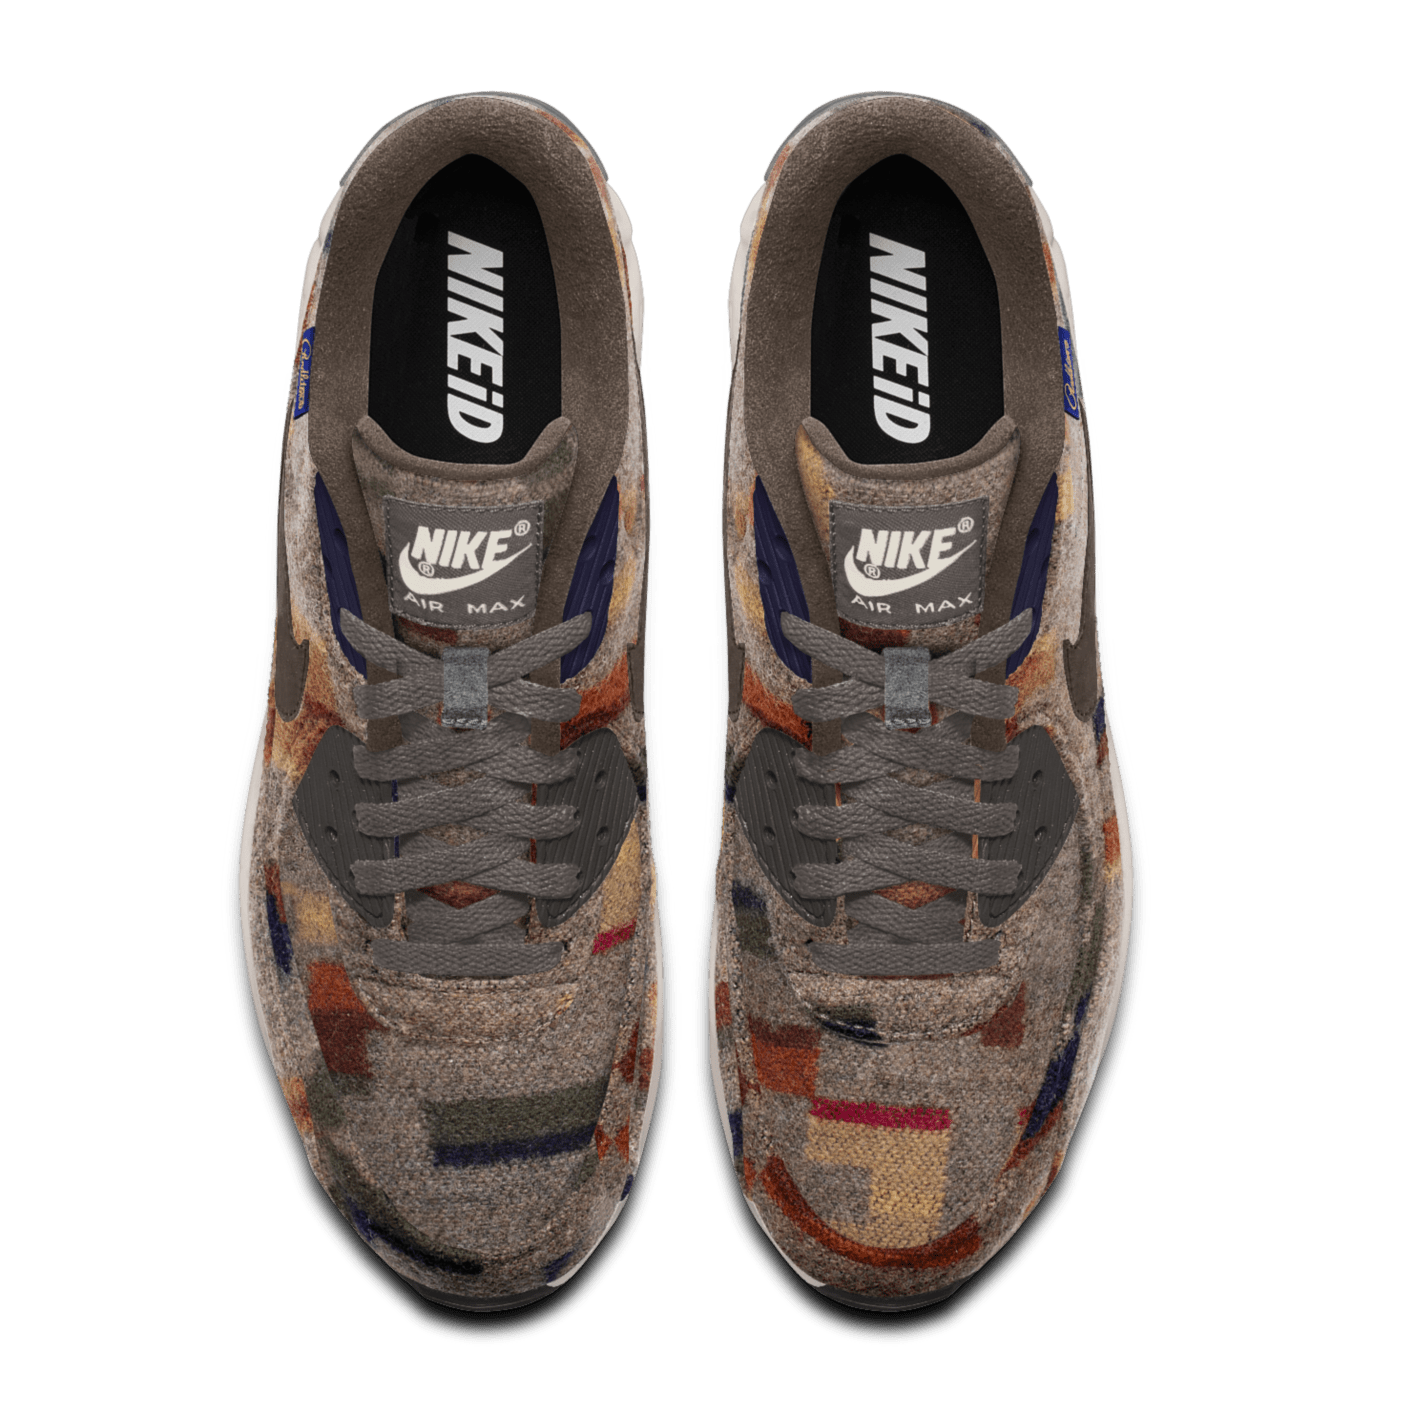 interferencia evitar Actor Nike Air Max 90 iD Pendleton Available Now | Sole Collector